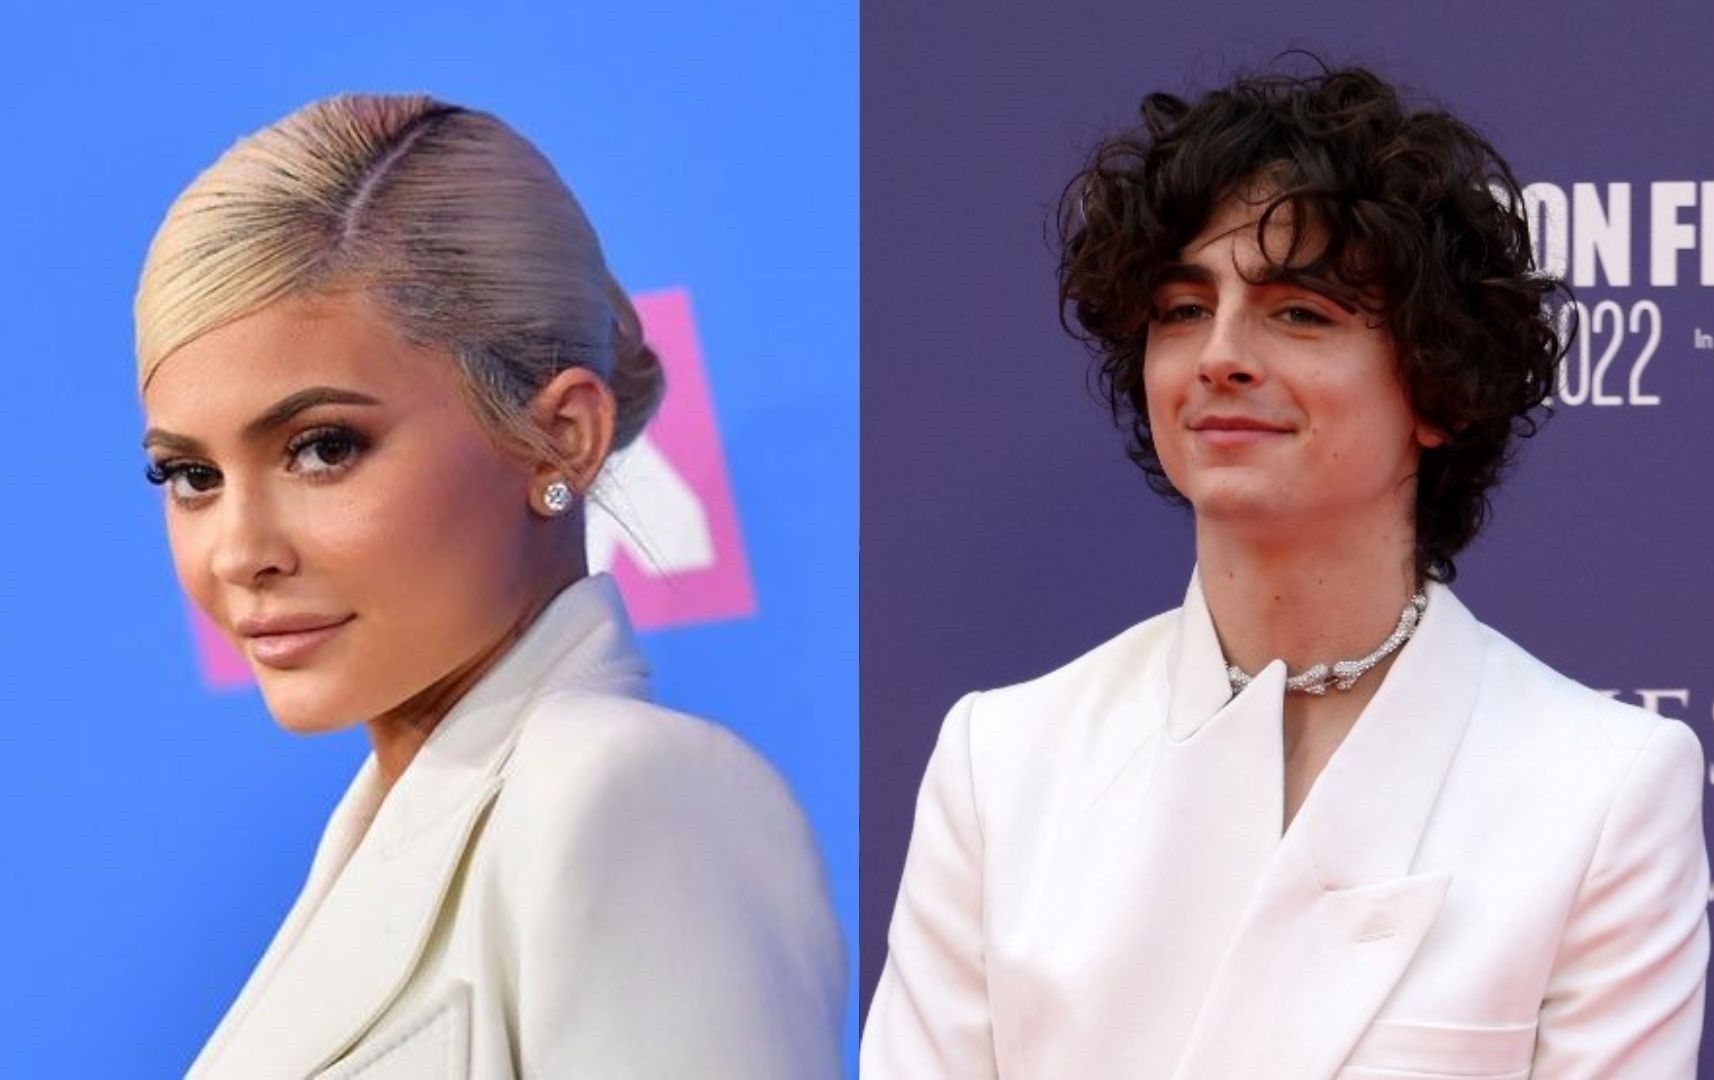 Kylie Jenner, TimothÃ©eÂ Chalamet are casually dating â�� reports